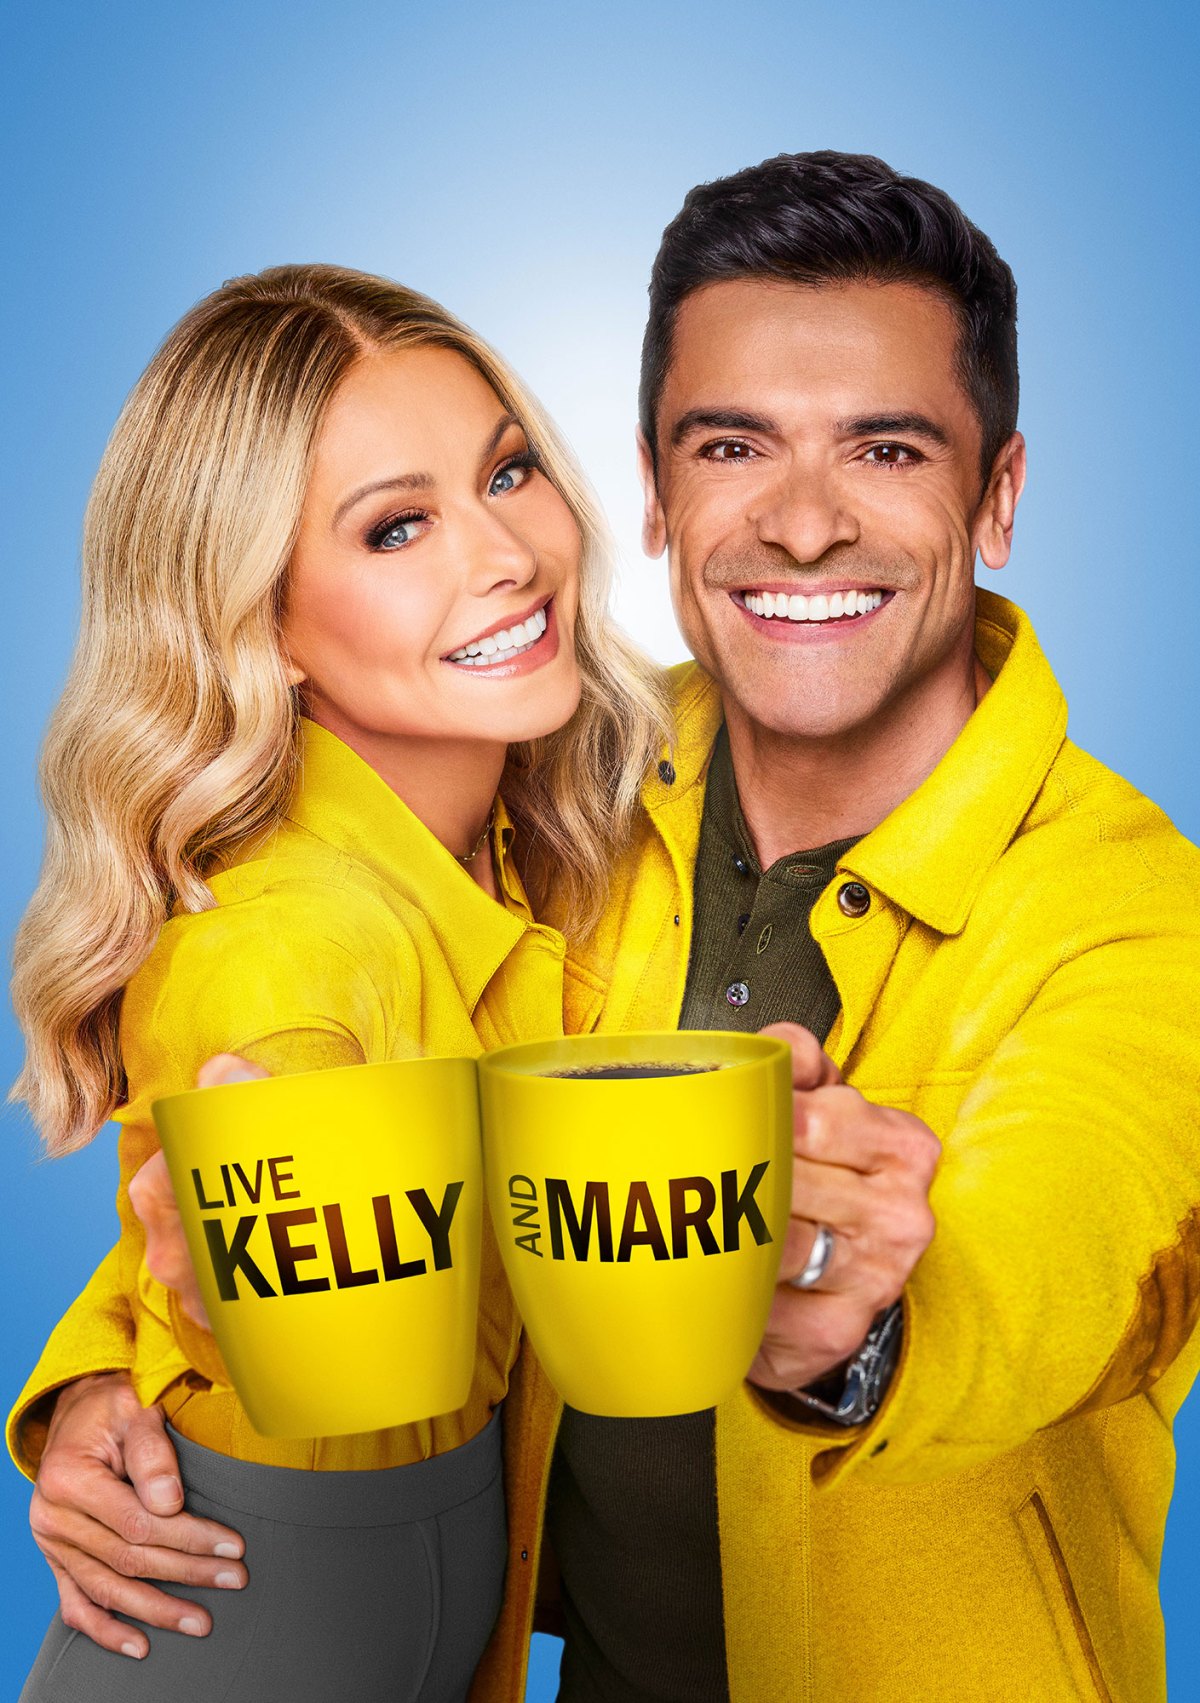 Headline Guest Lineup for ‘Live With Kelly and Mark,’ Nov. 27-Dec. 1